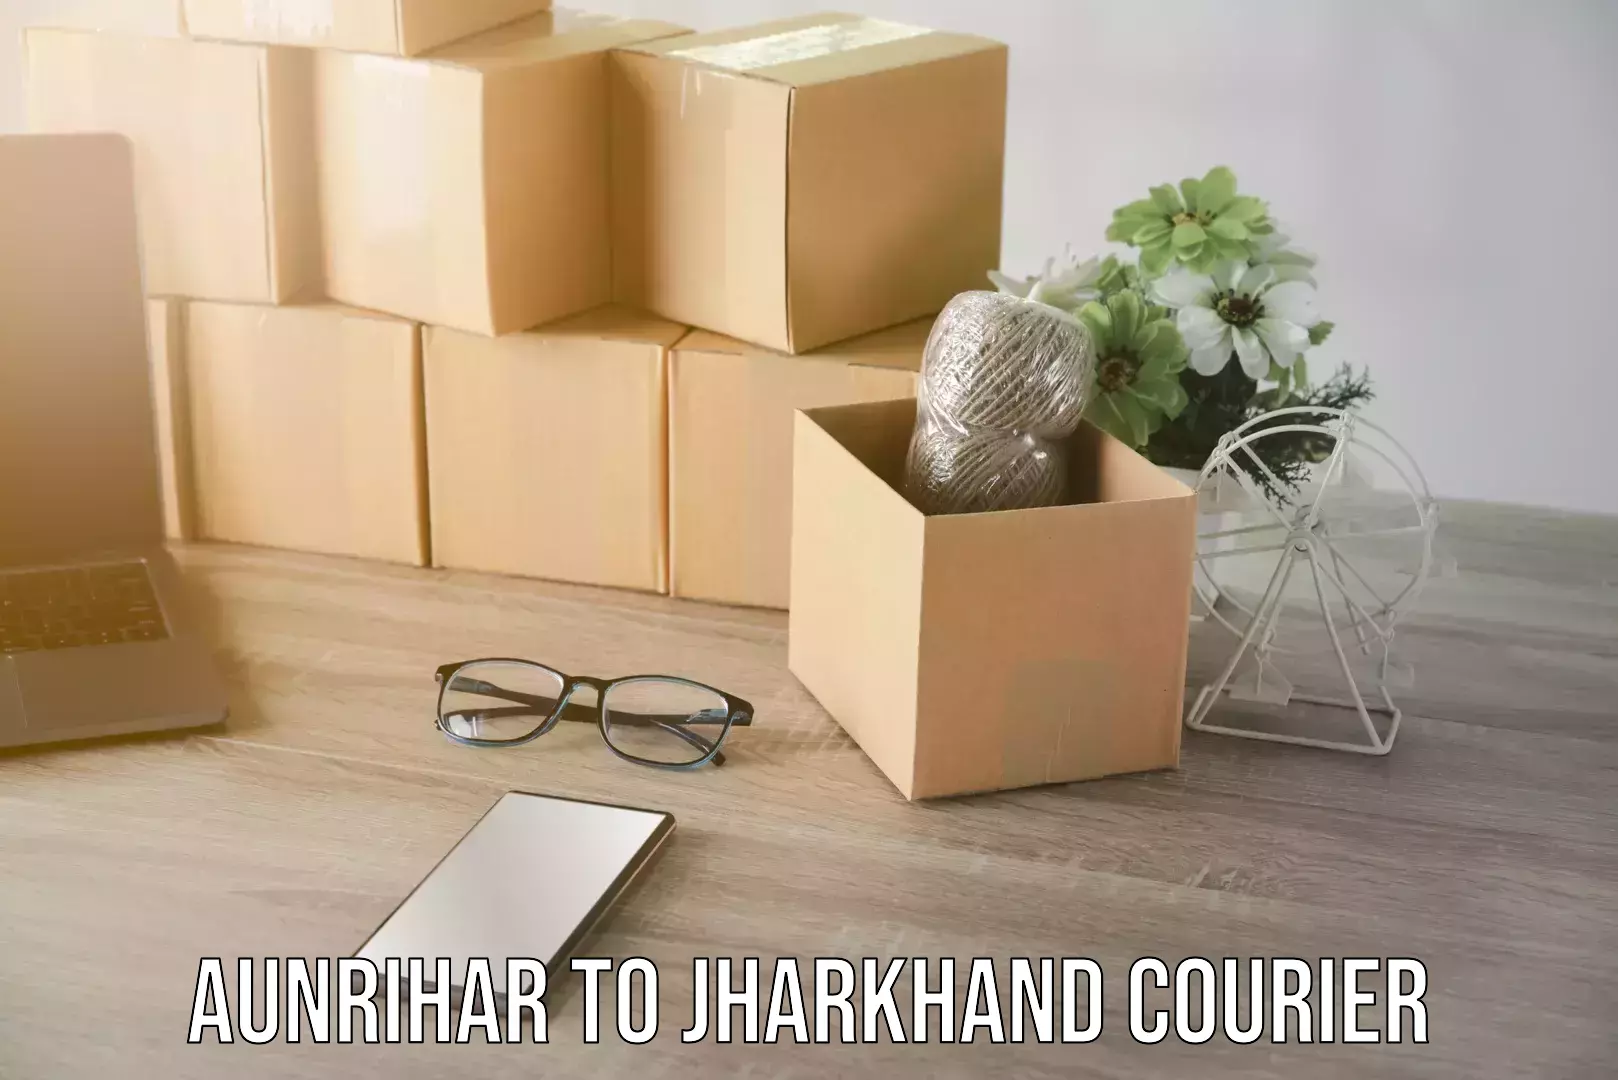 Courier service partnerships Aunrihar to Jharkhand